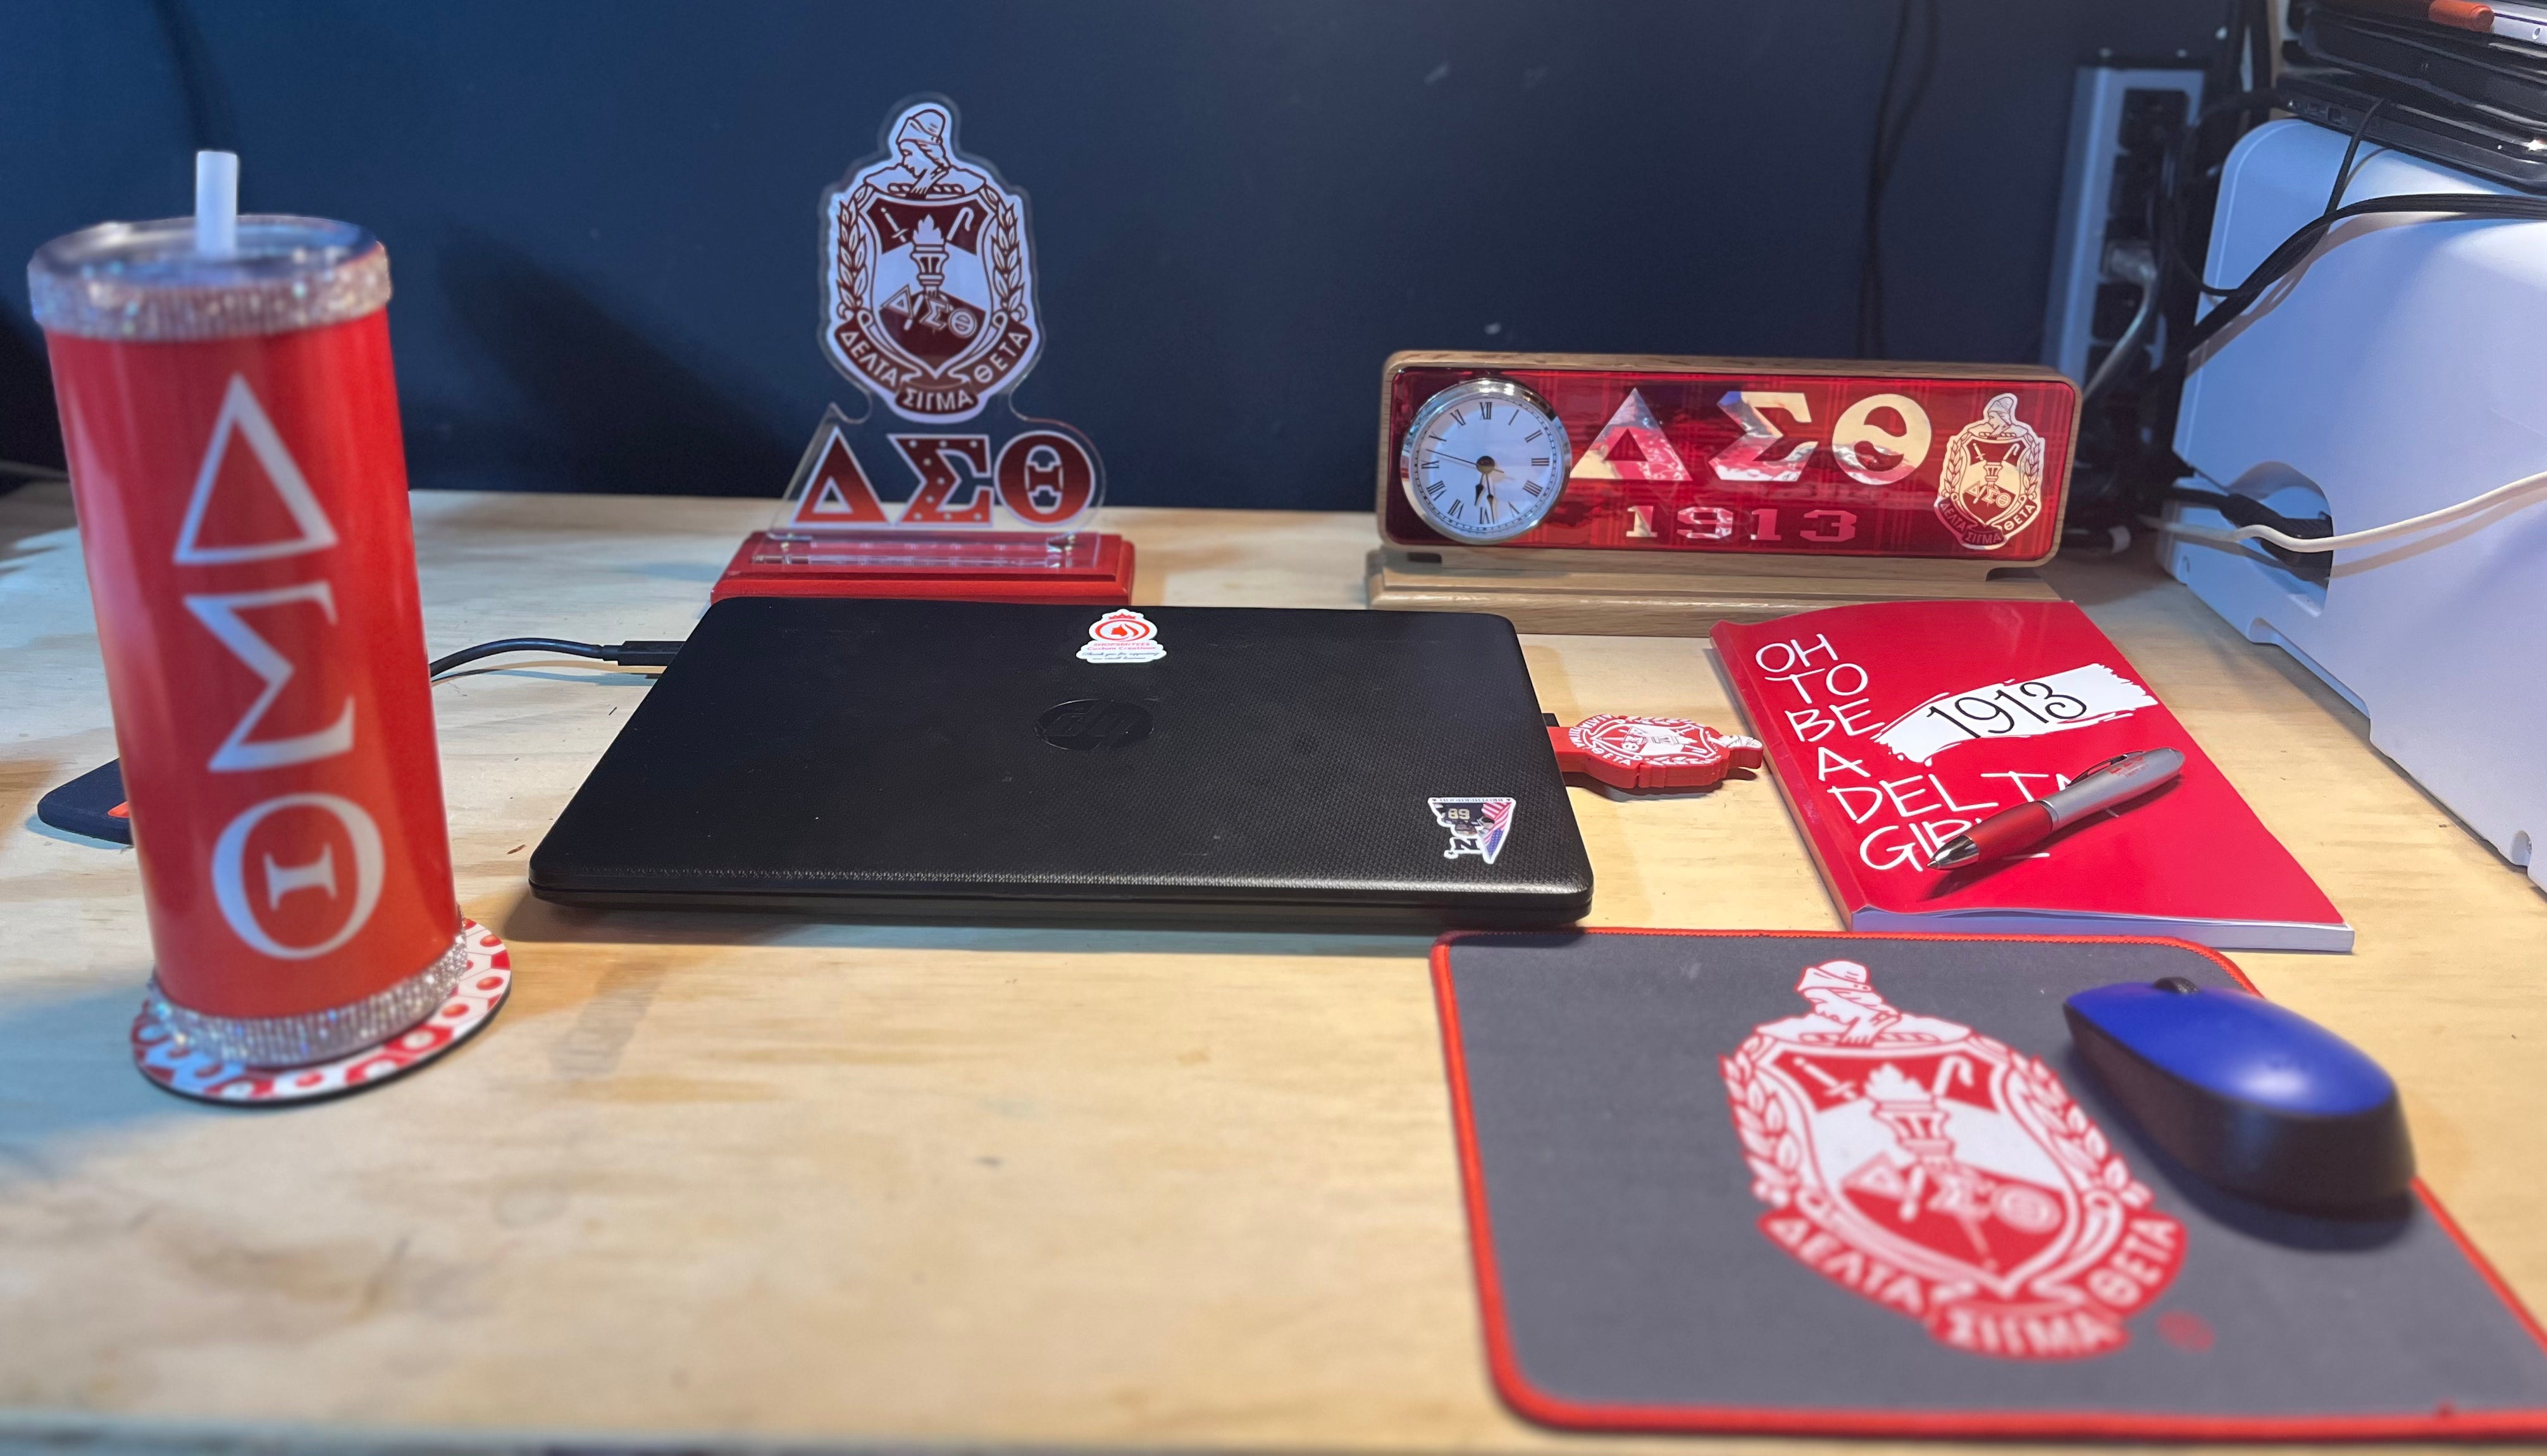 Delta Sigma Theta Mouse Pad with Sorority Crest